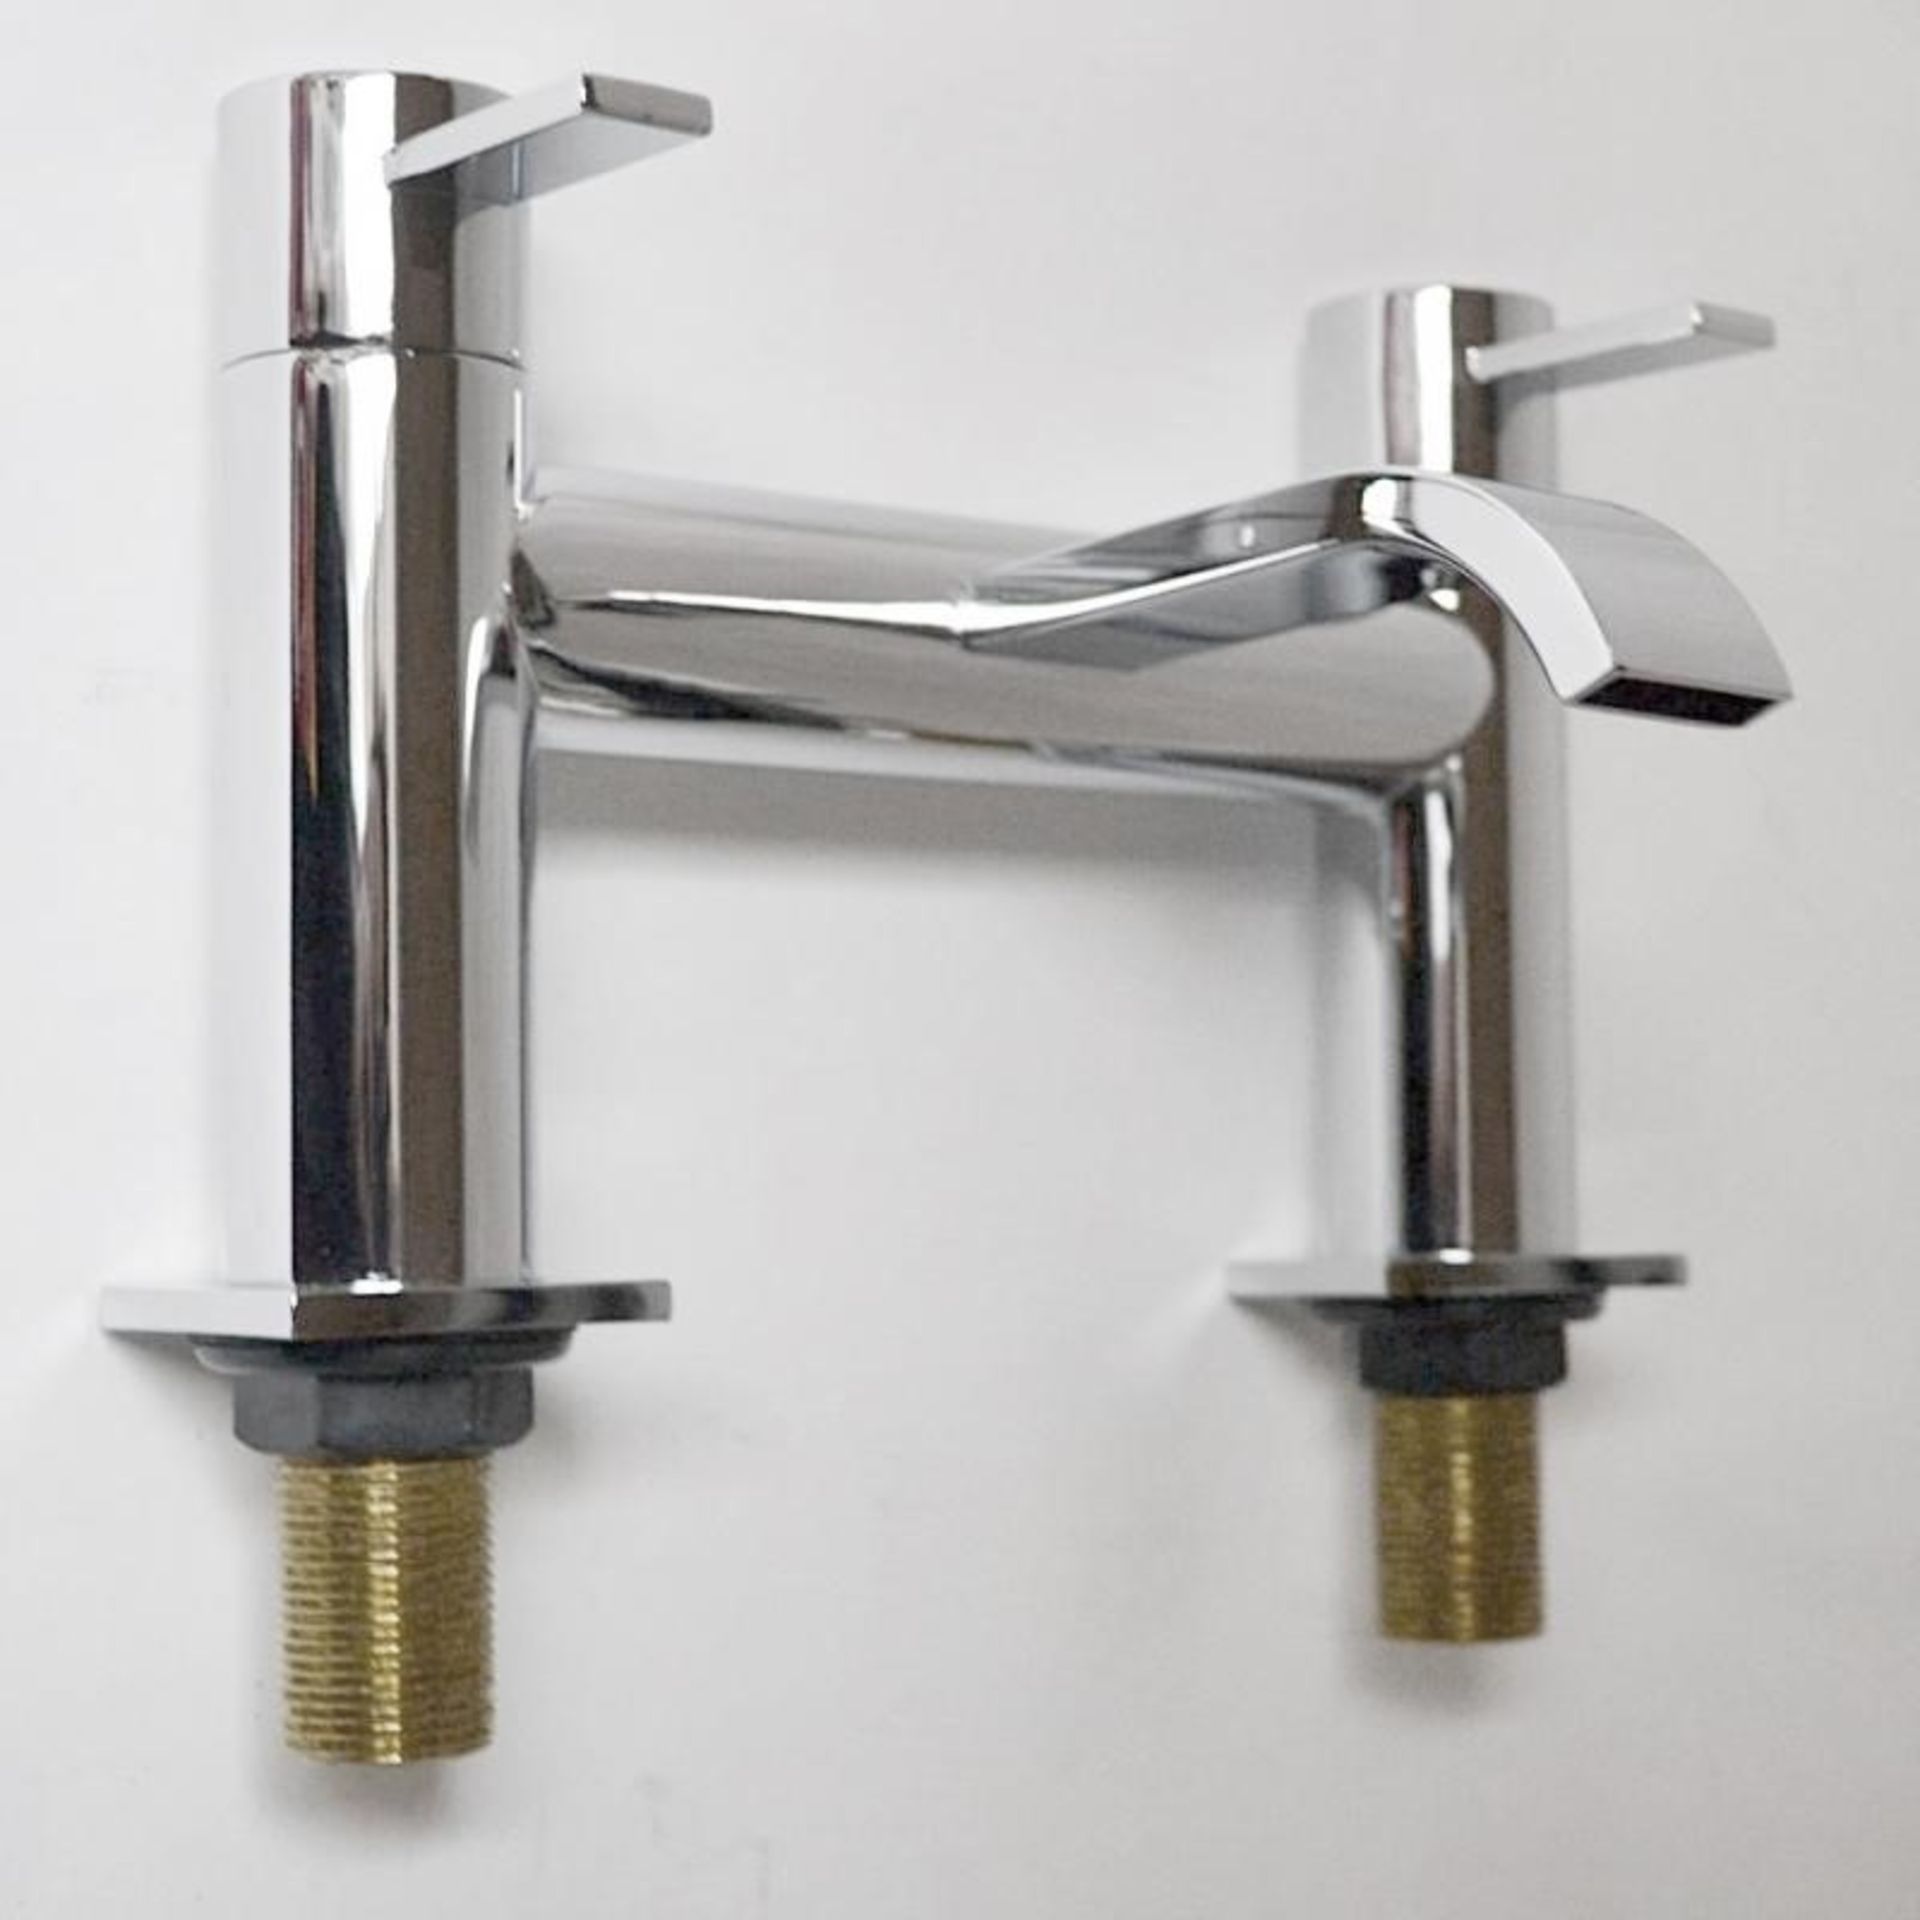 1 x Vogue Series 2 Bath Filler Taps in Chrome - Approx RRP £275! - Image 3 of 7